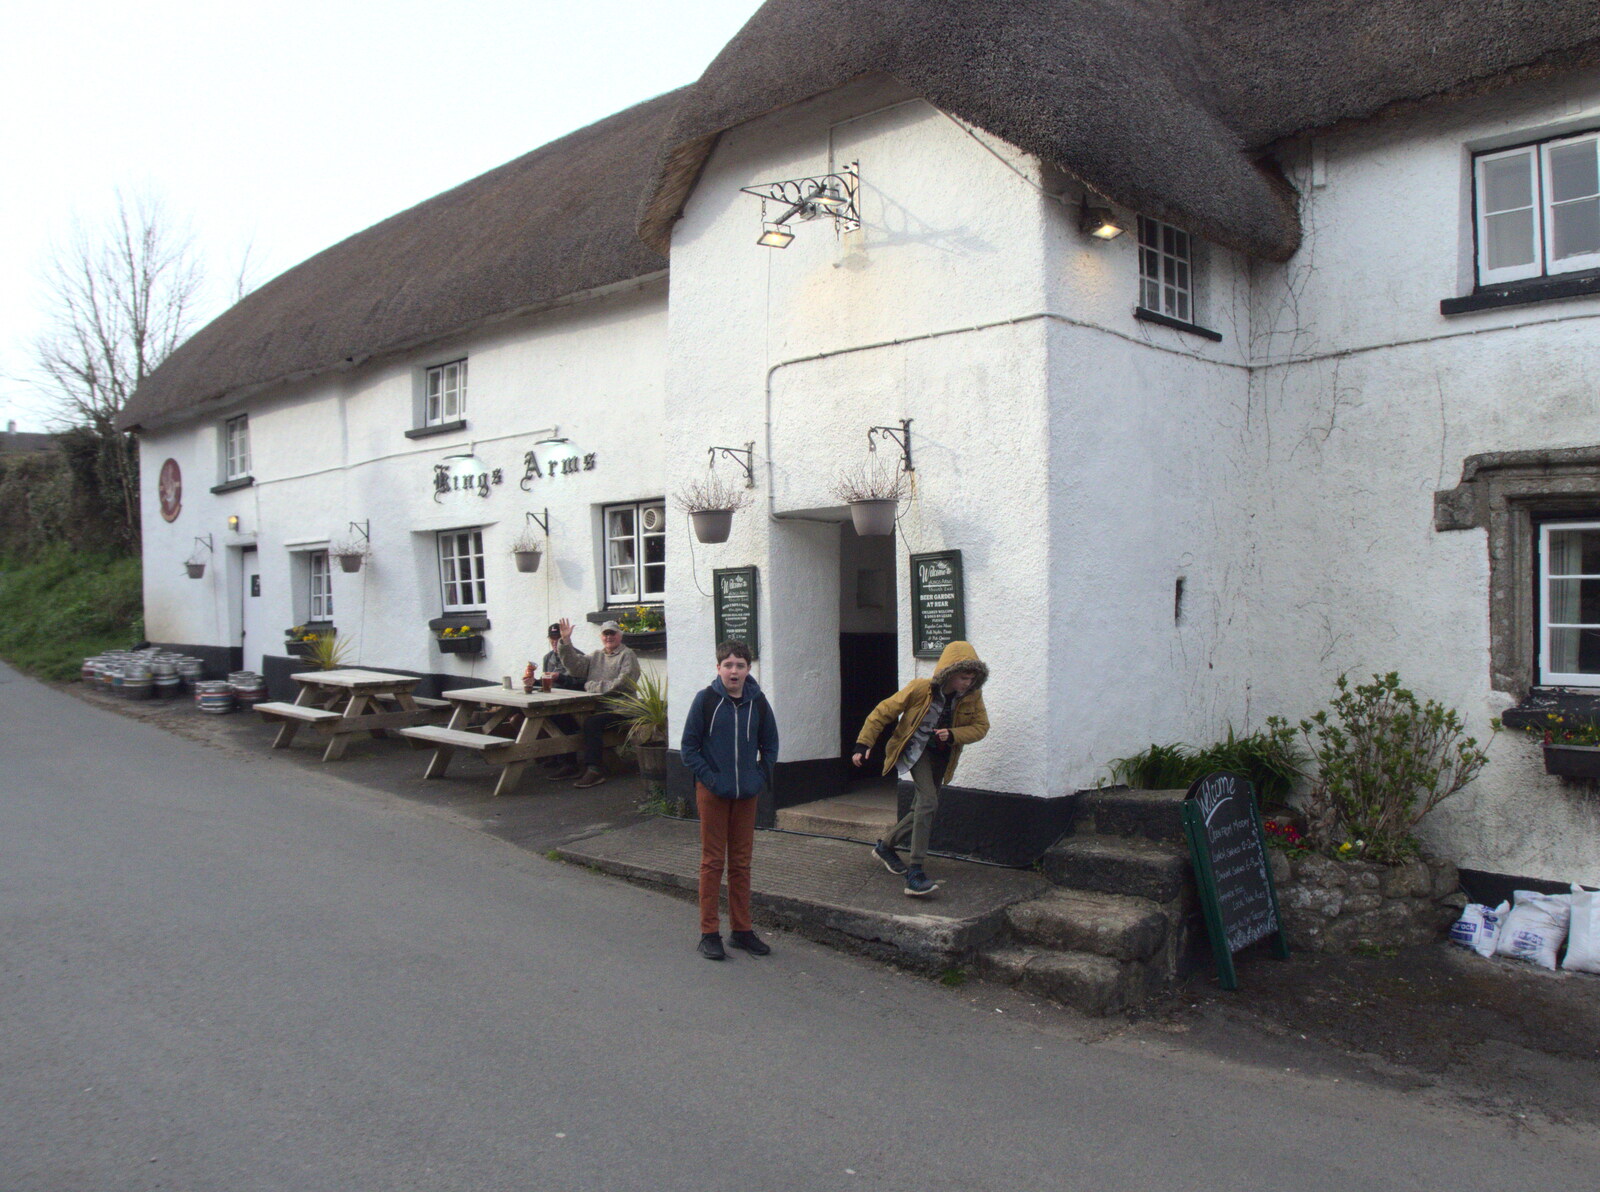 The boys outside the King's Arms from Easter in South Zeal and Moretonhampstead, Devon - 9th April